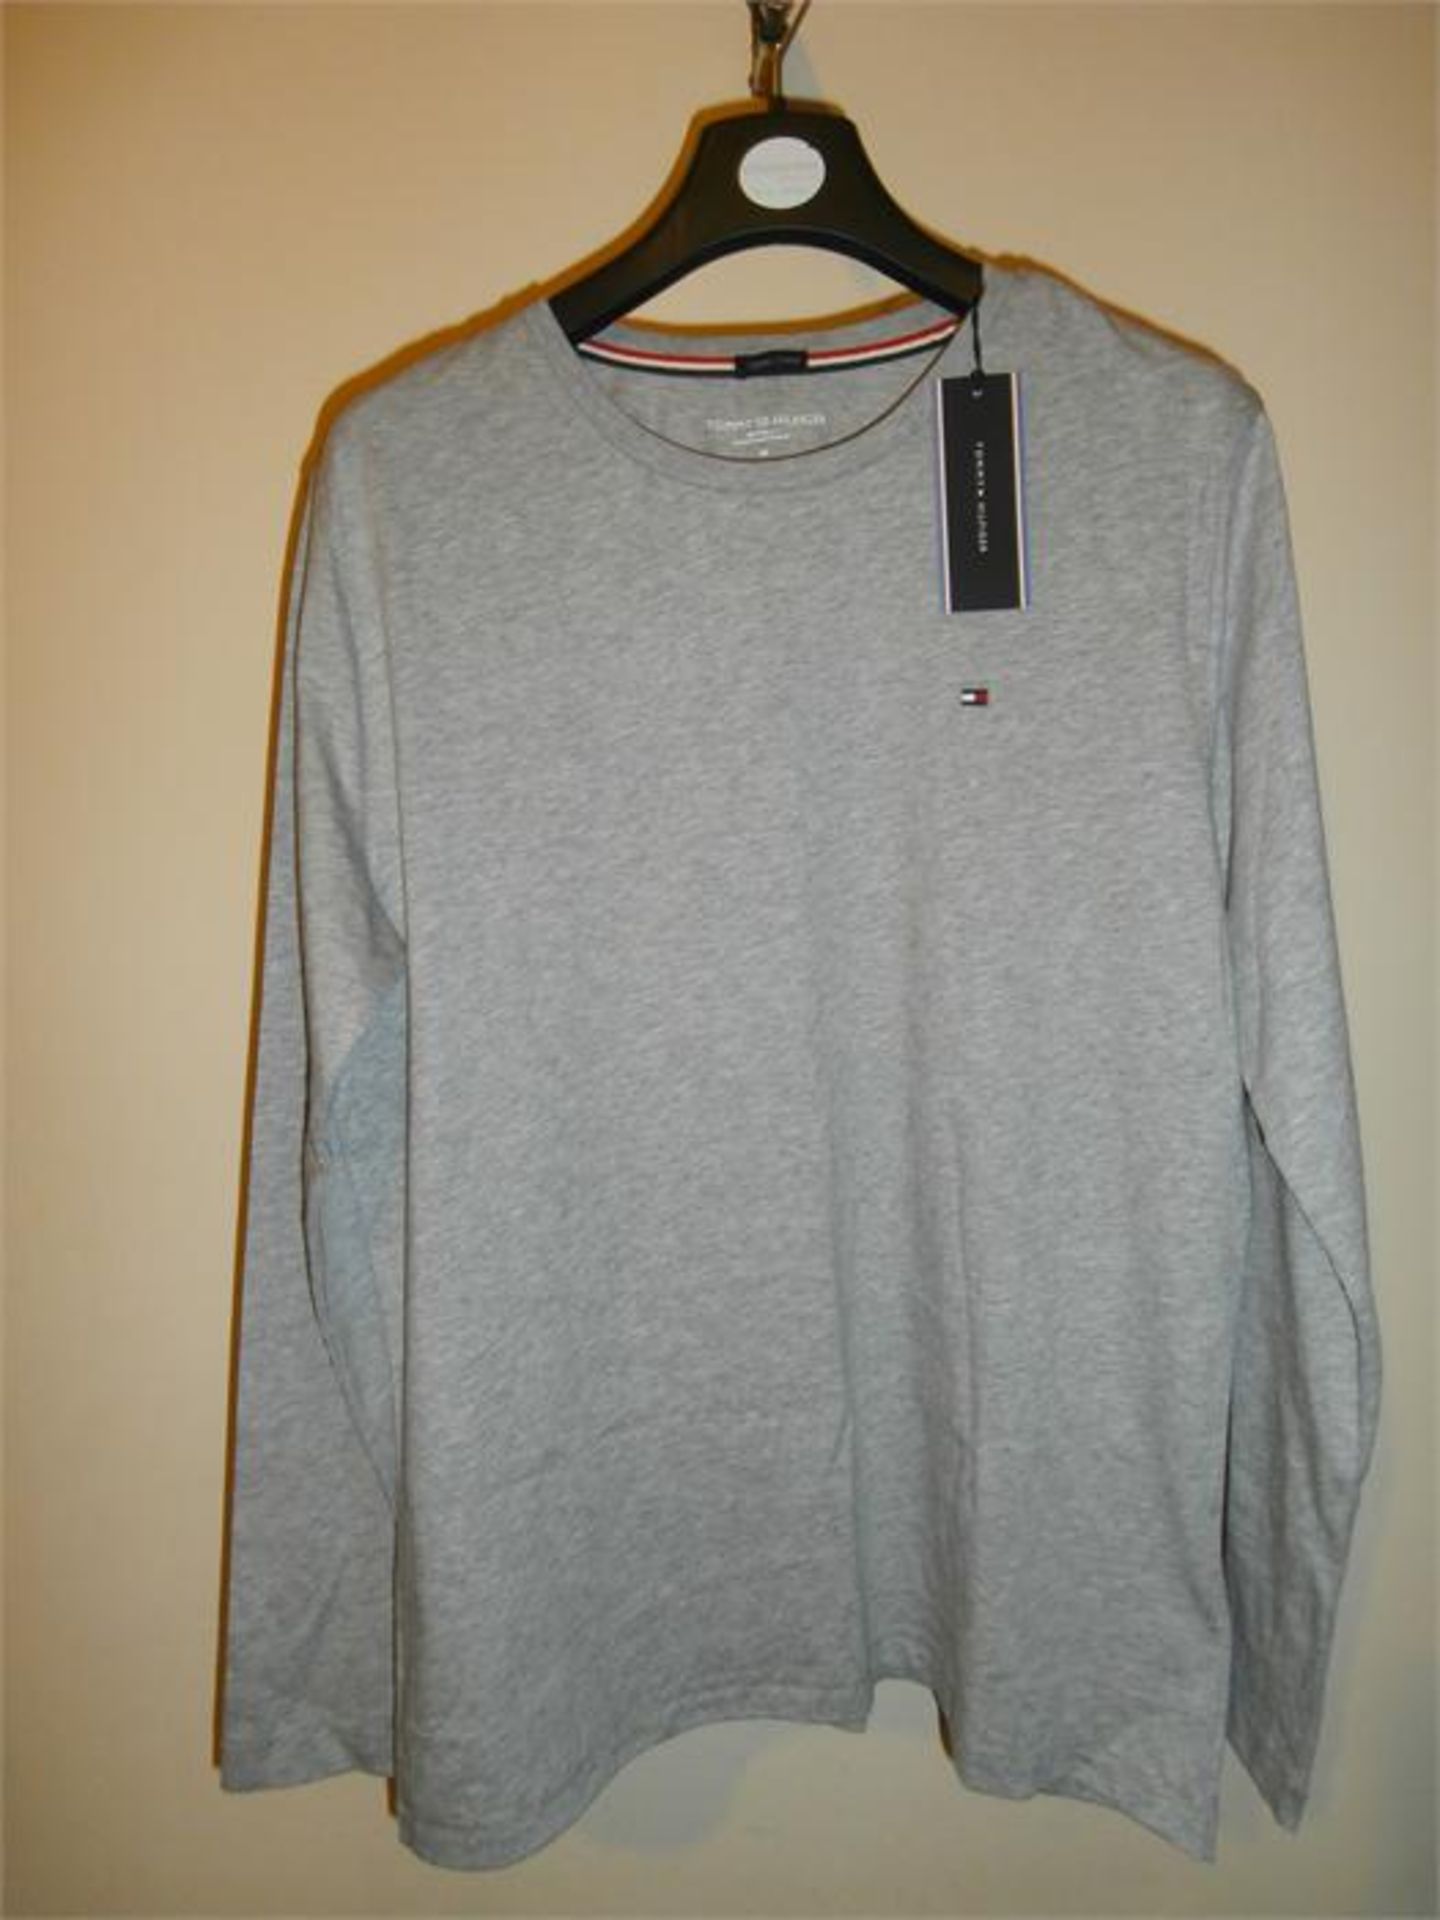 NEW. Tommy Hilfiger, Norton cn tee Is, Grey, Long Sleeved, Crew Neck, TOP. Size M. RRP £50